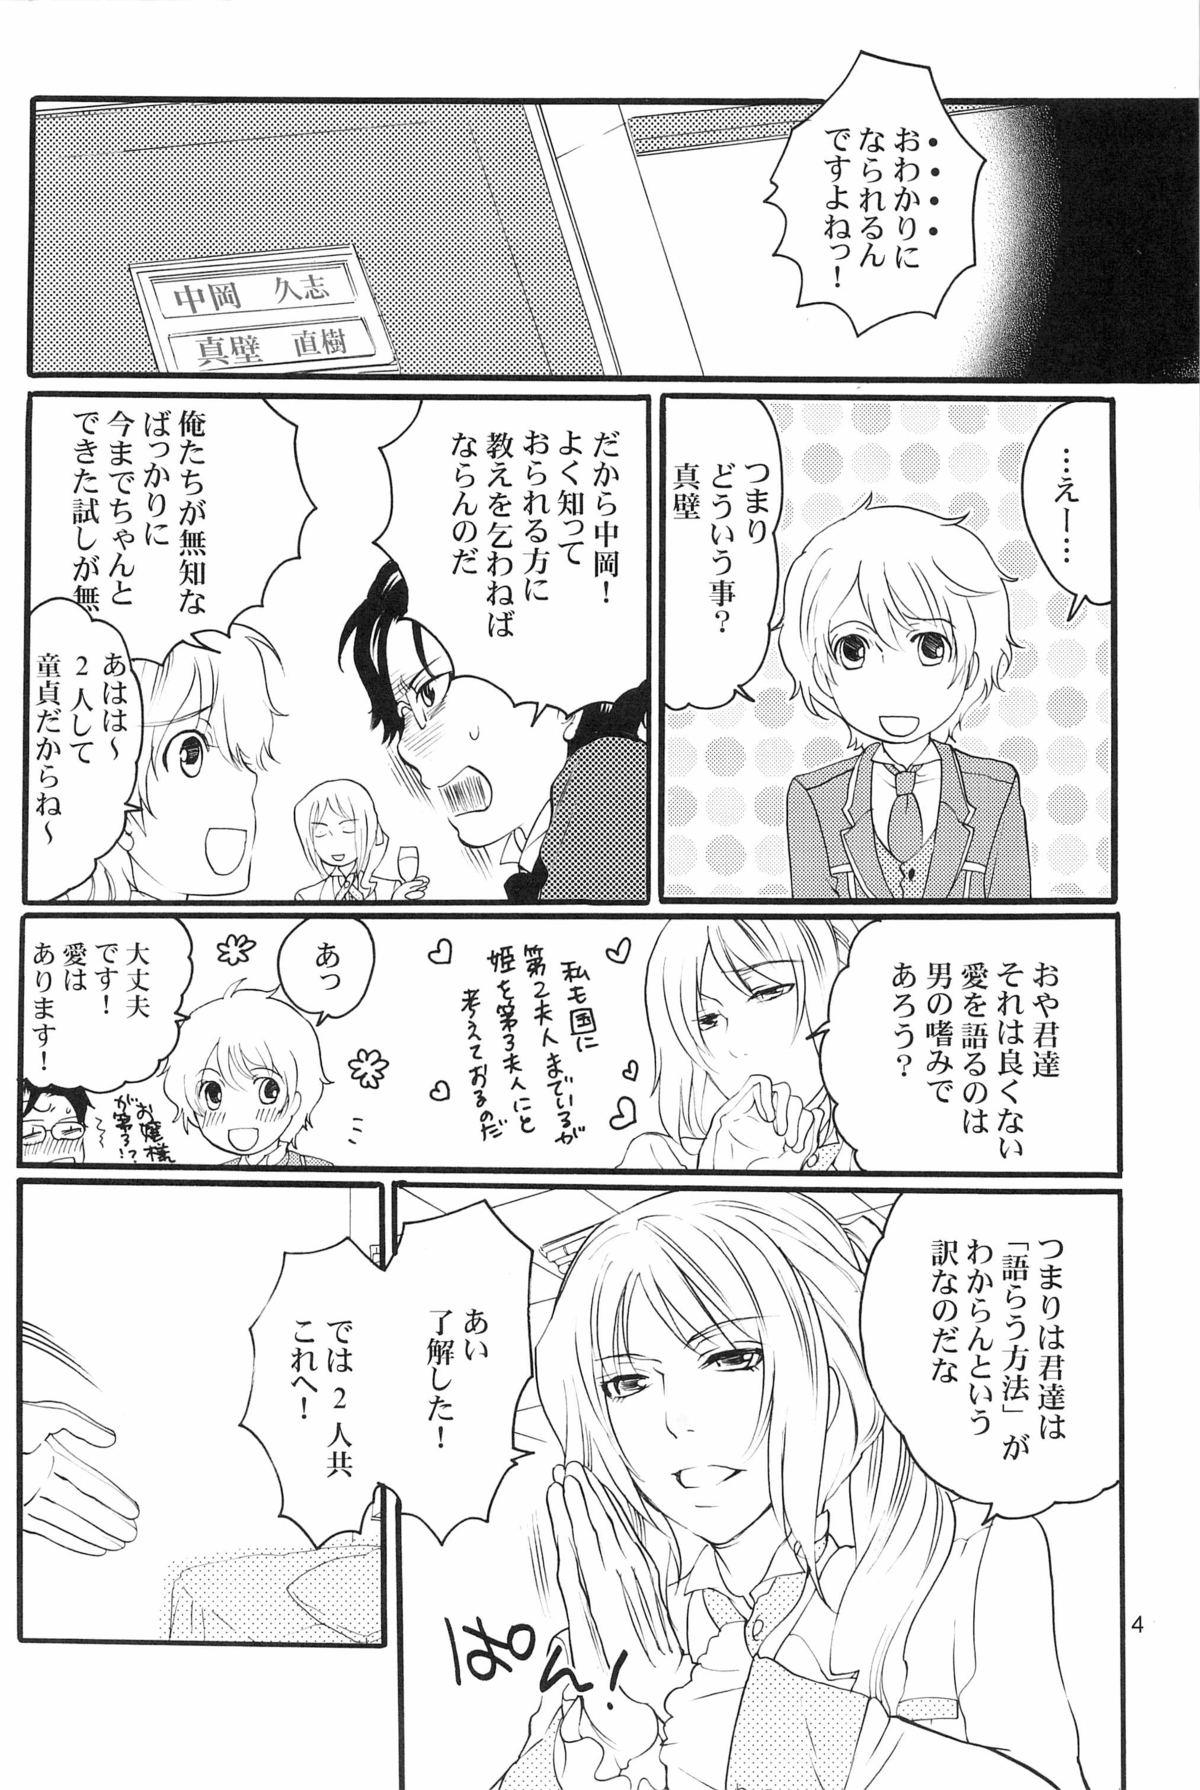 Old Young DT Kouryakuhon - Starry sky Cavala - Page 4